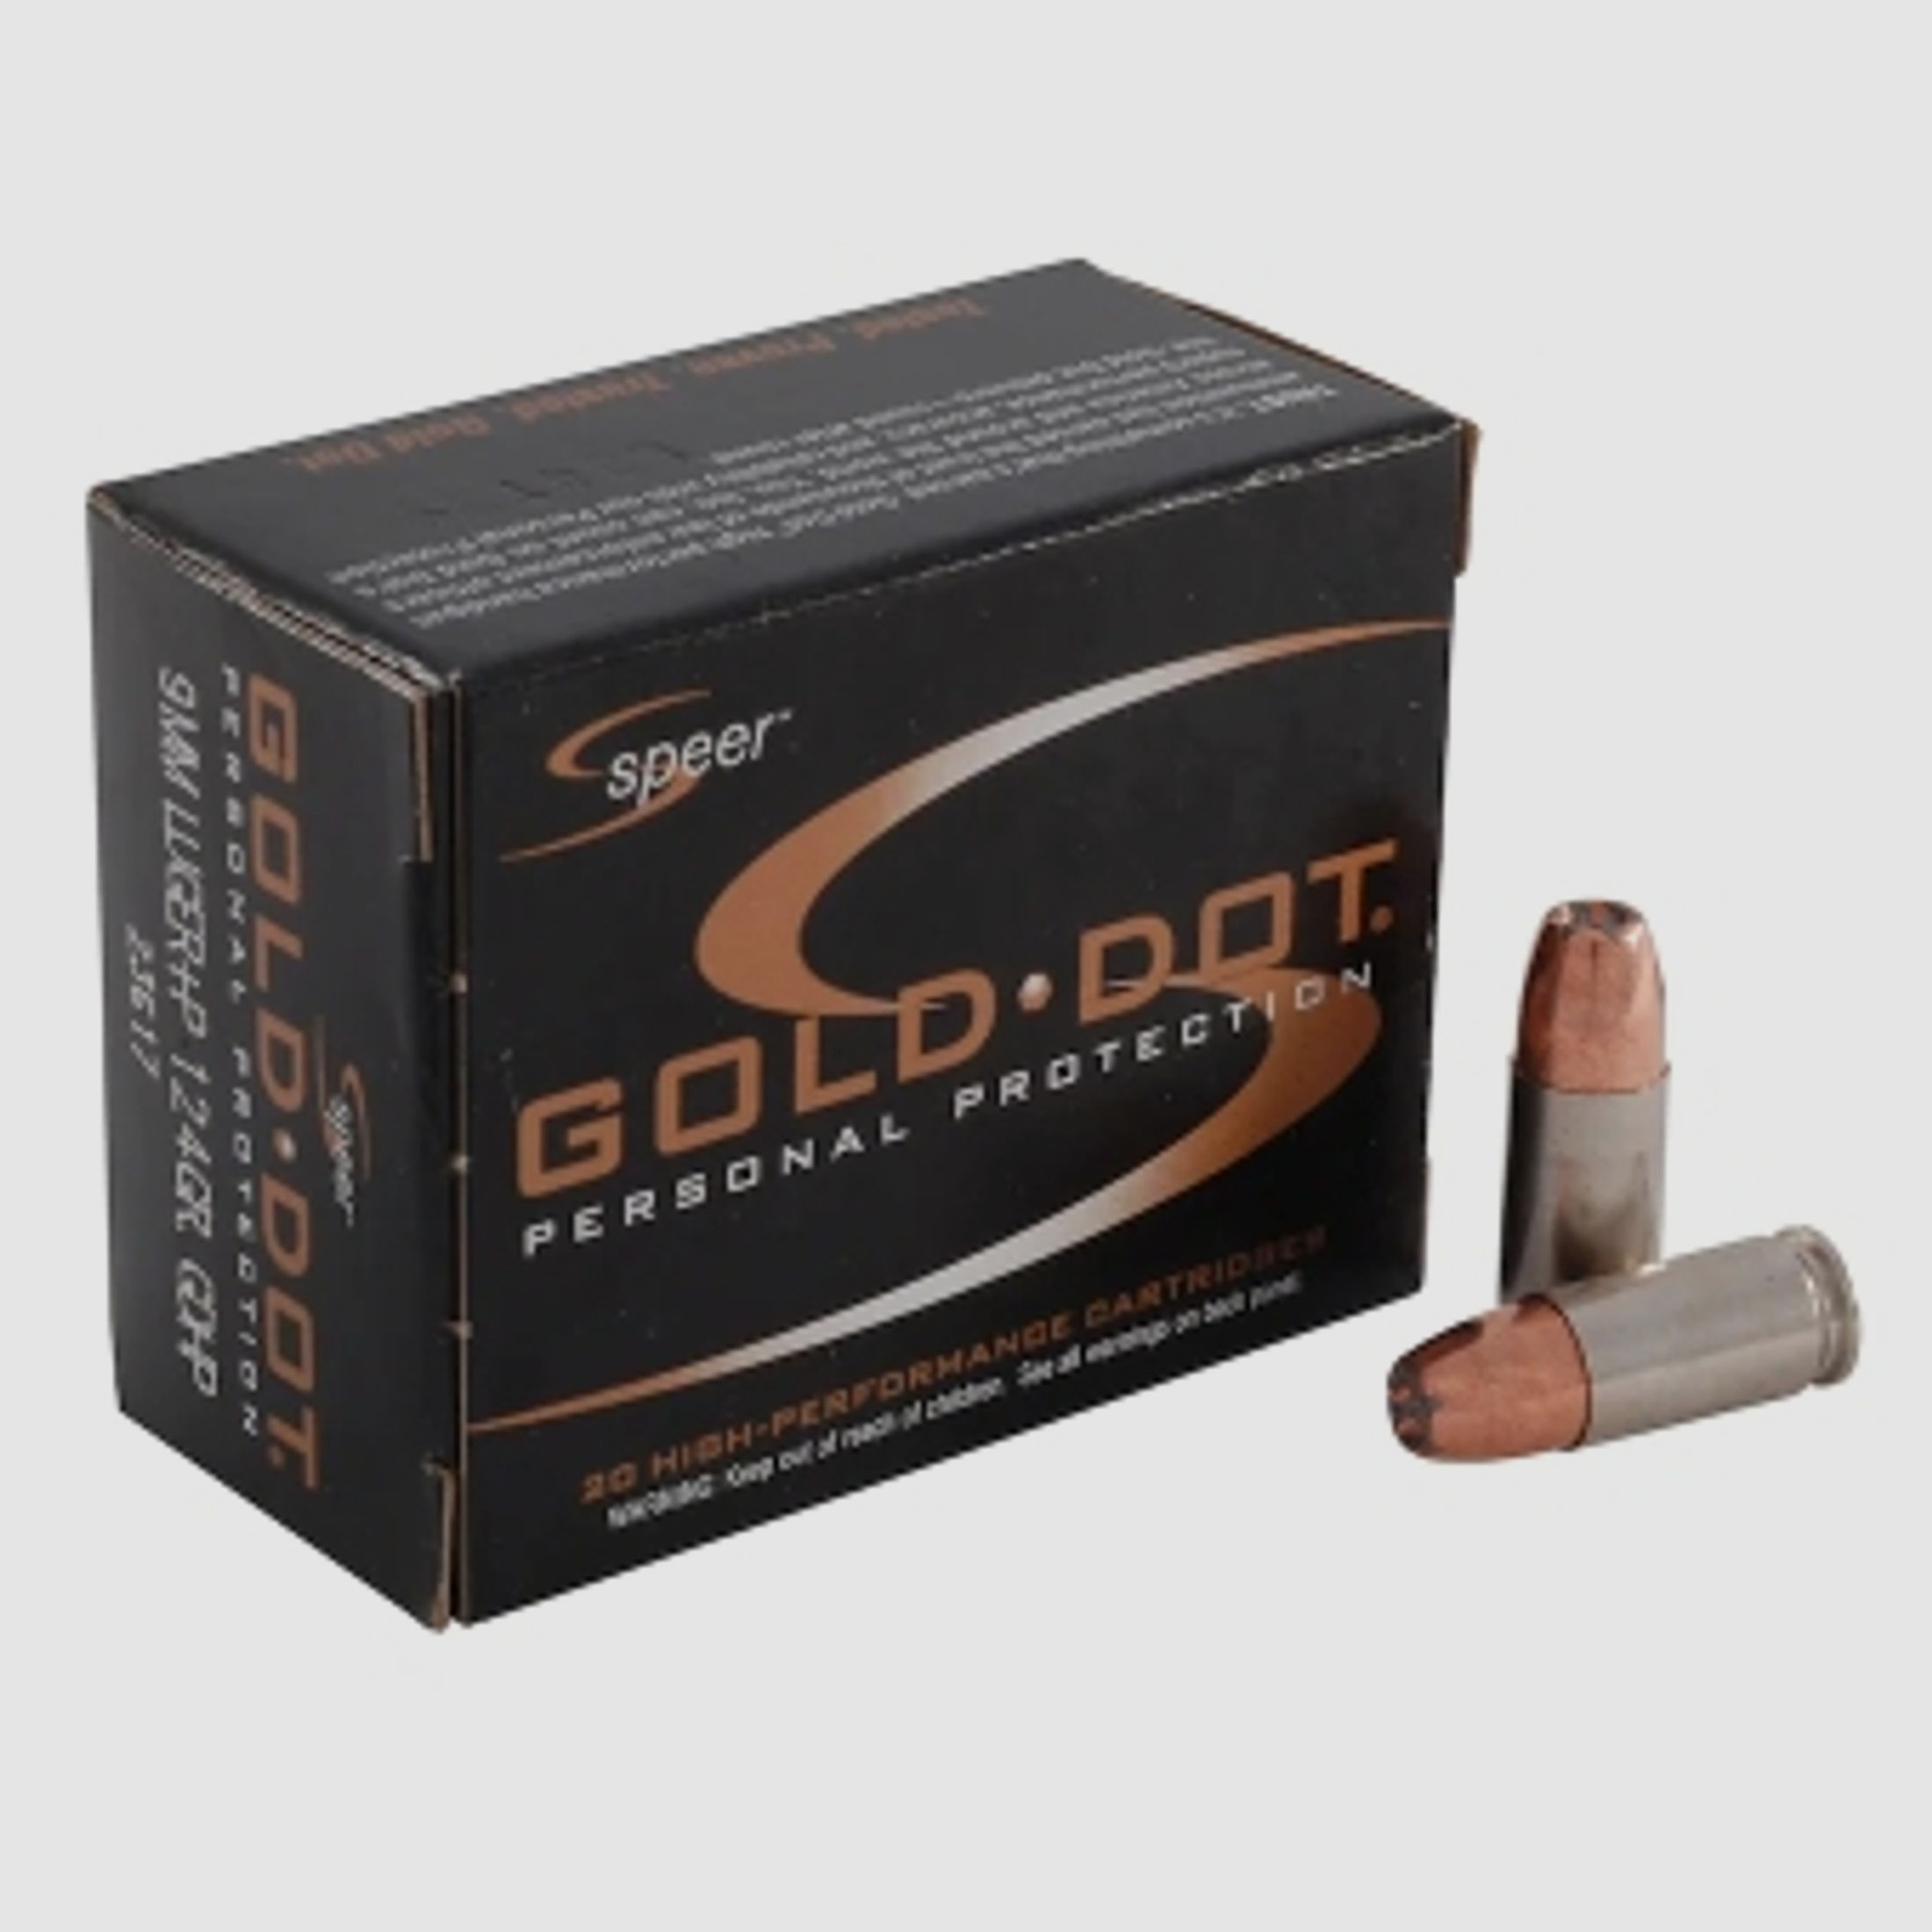 Speer Gold Dot Personal Protection 9mm Luger 124GR GDHP 20 Patronen